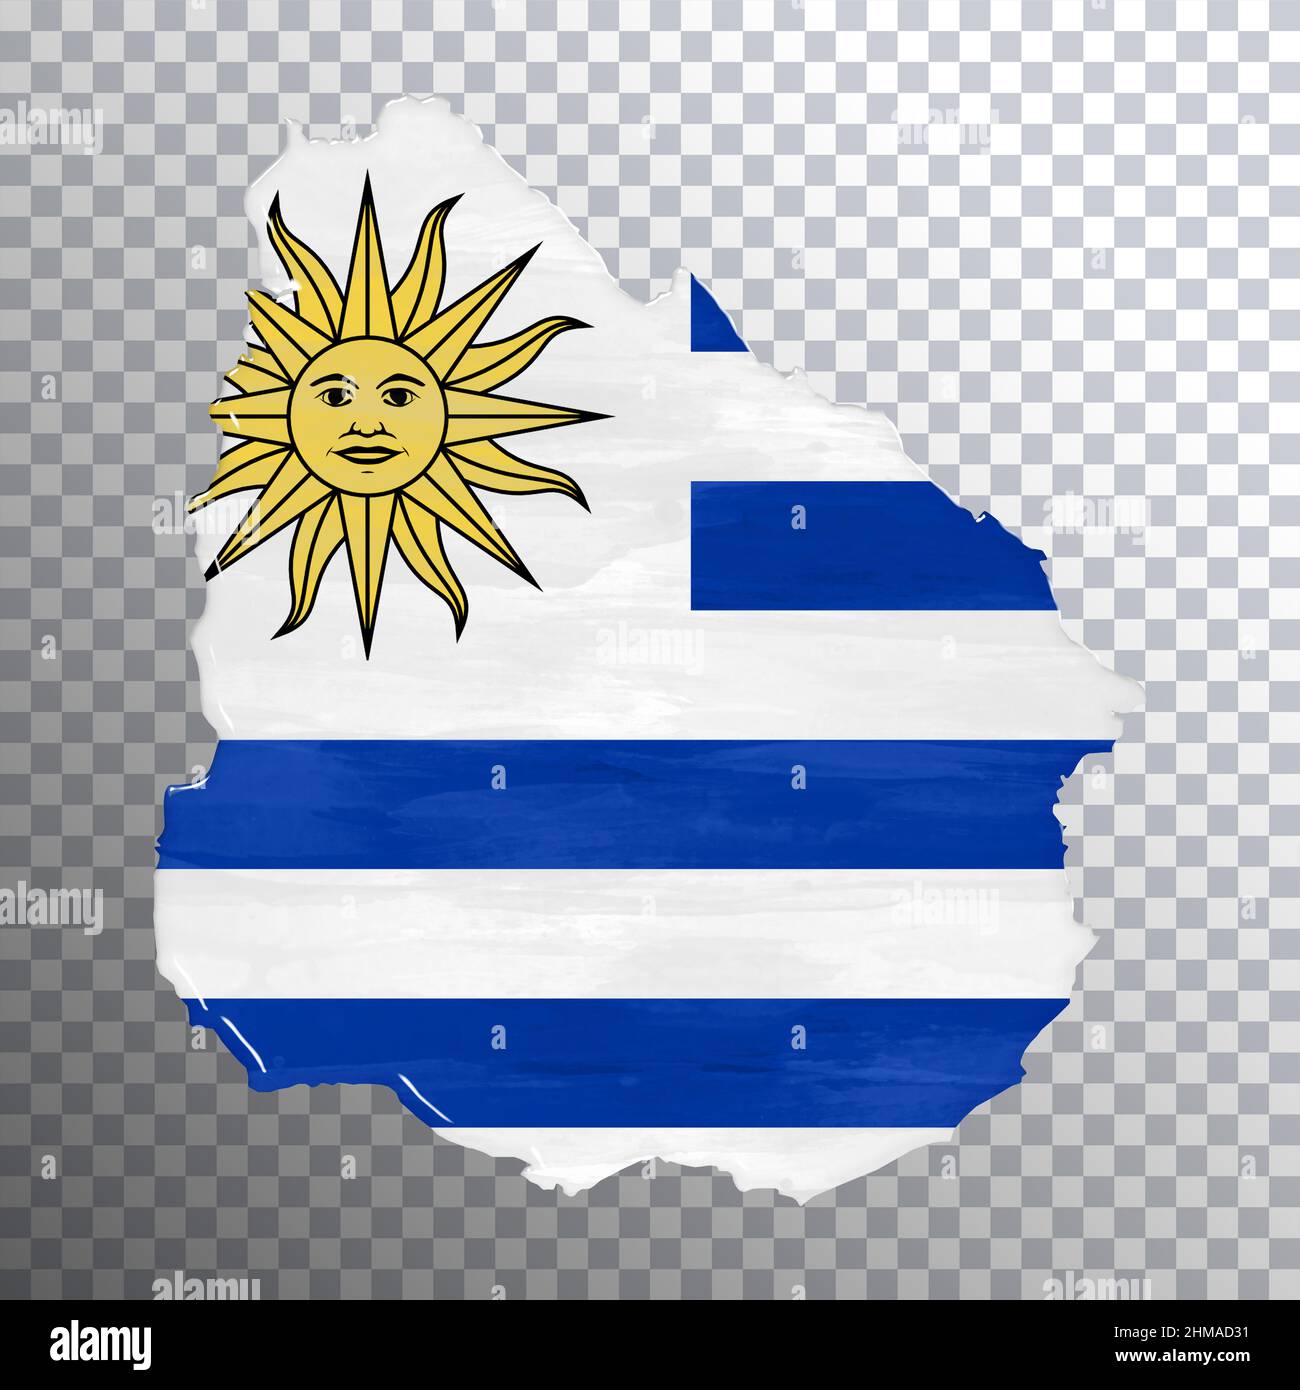 Uruguay national flag in a shape of country map Vector Image